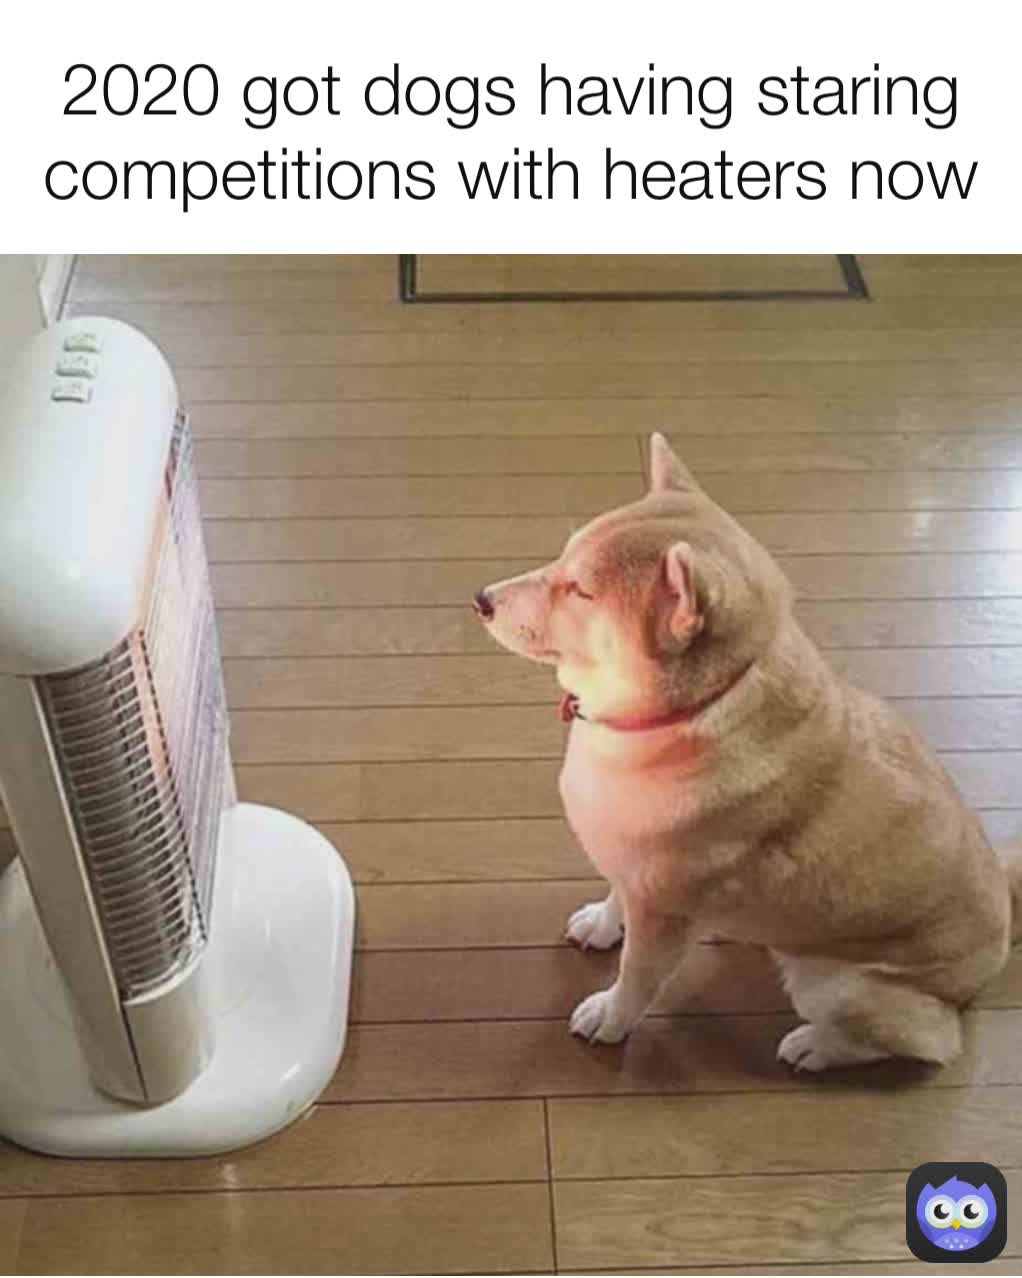 2020 got dogs having staring competitions with heaters now